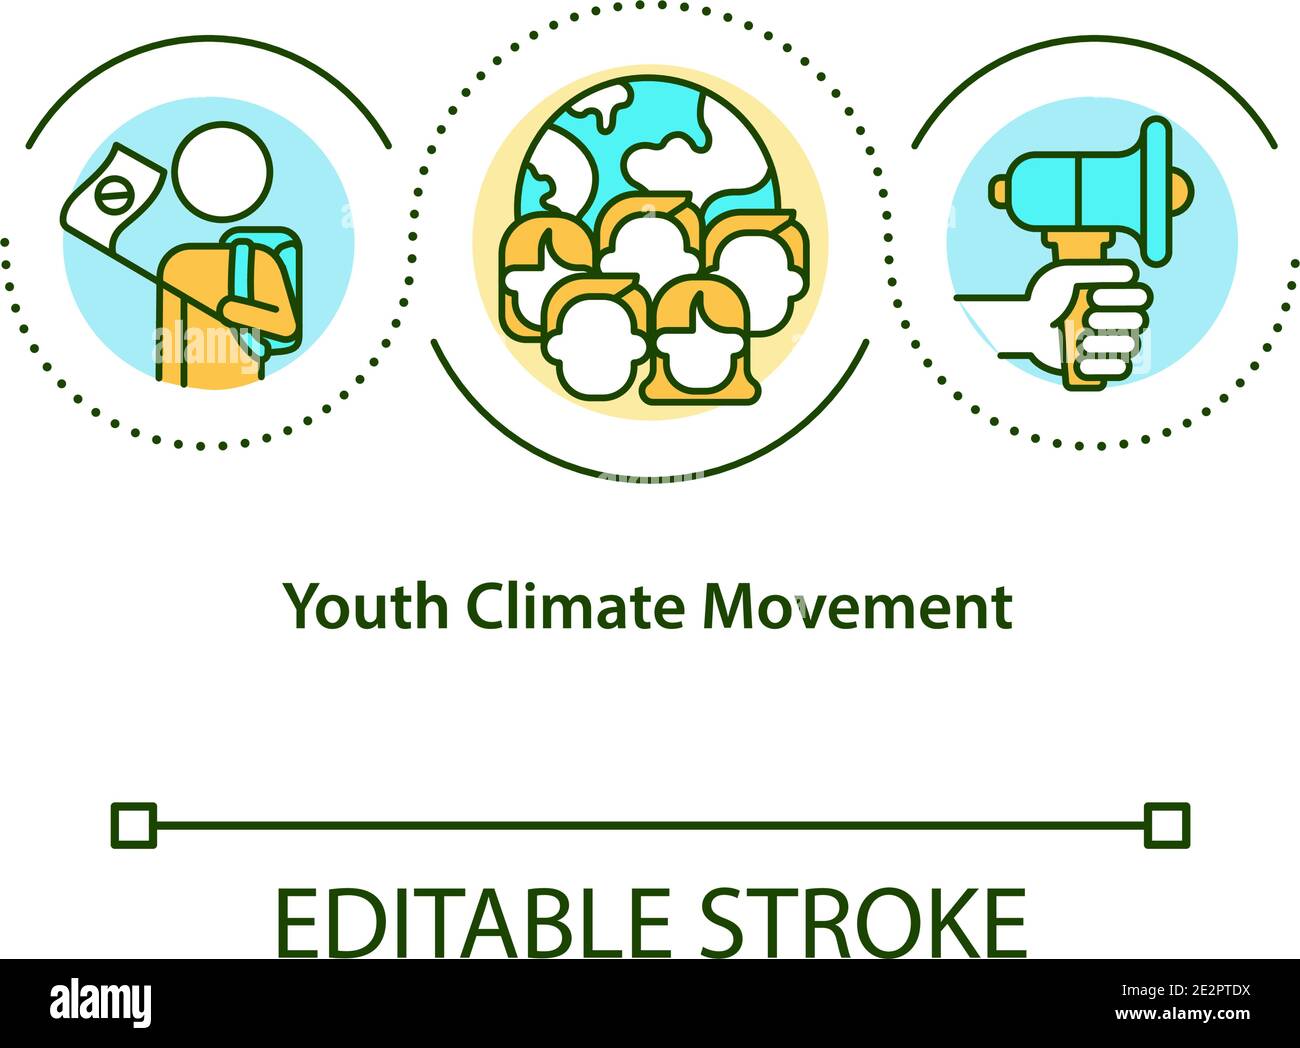 Youth climate movement concept icon Stock Vector